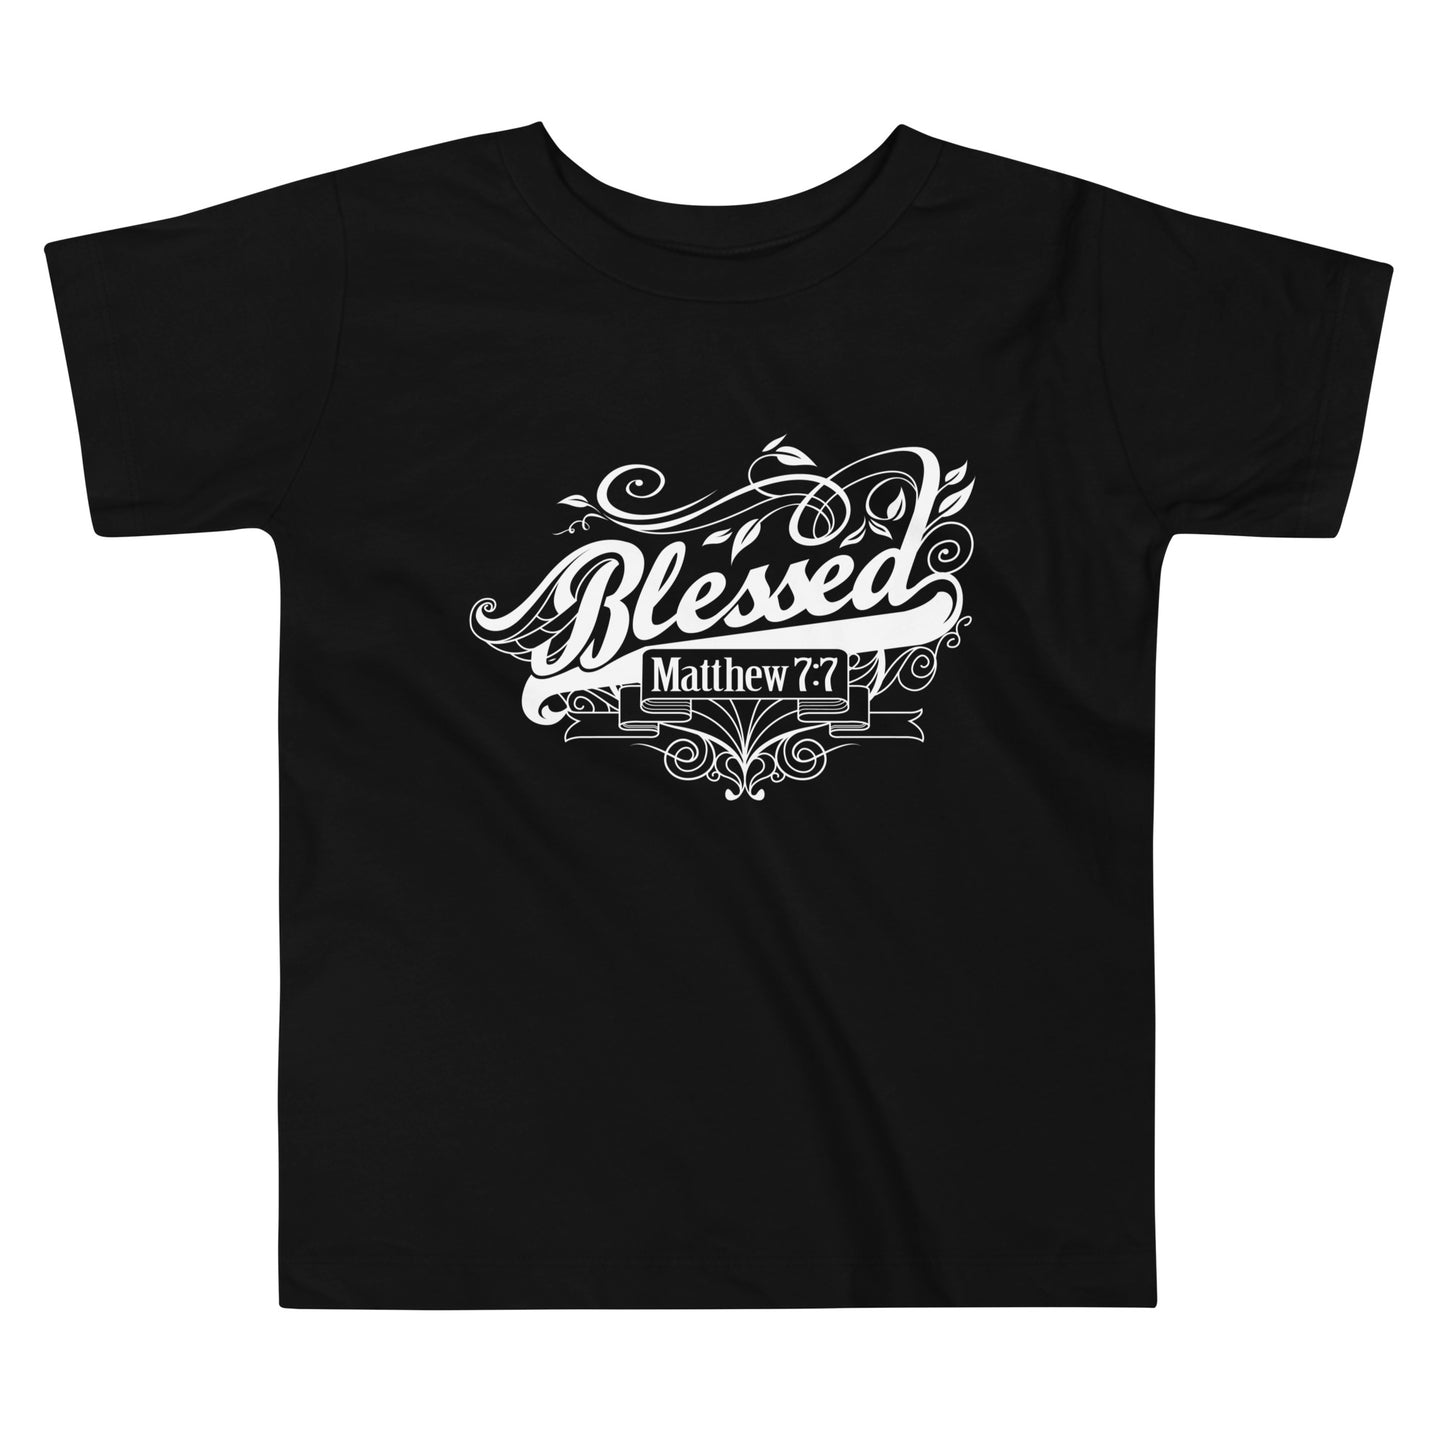 Blessed - Toddler Short Sleeve Tee - View All Colors